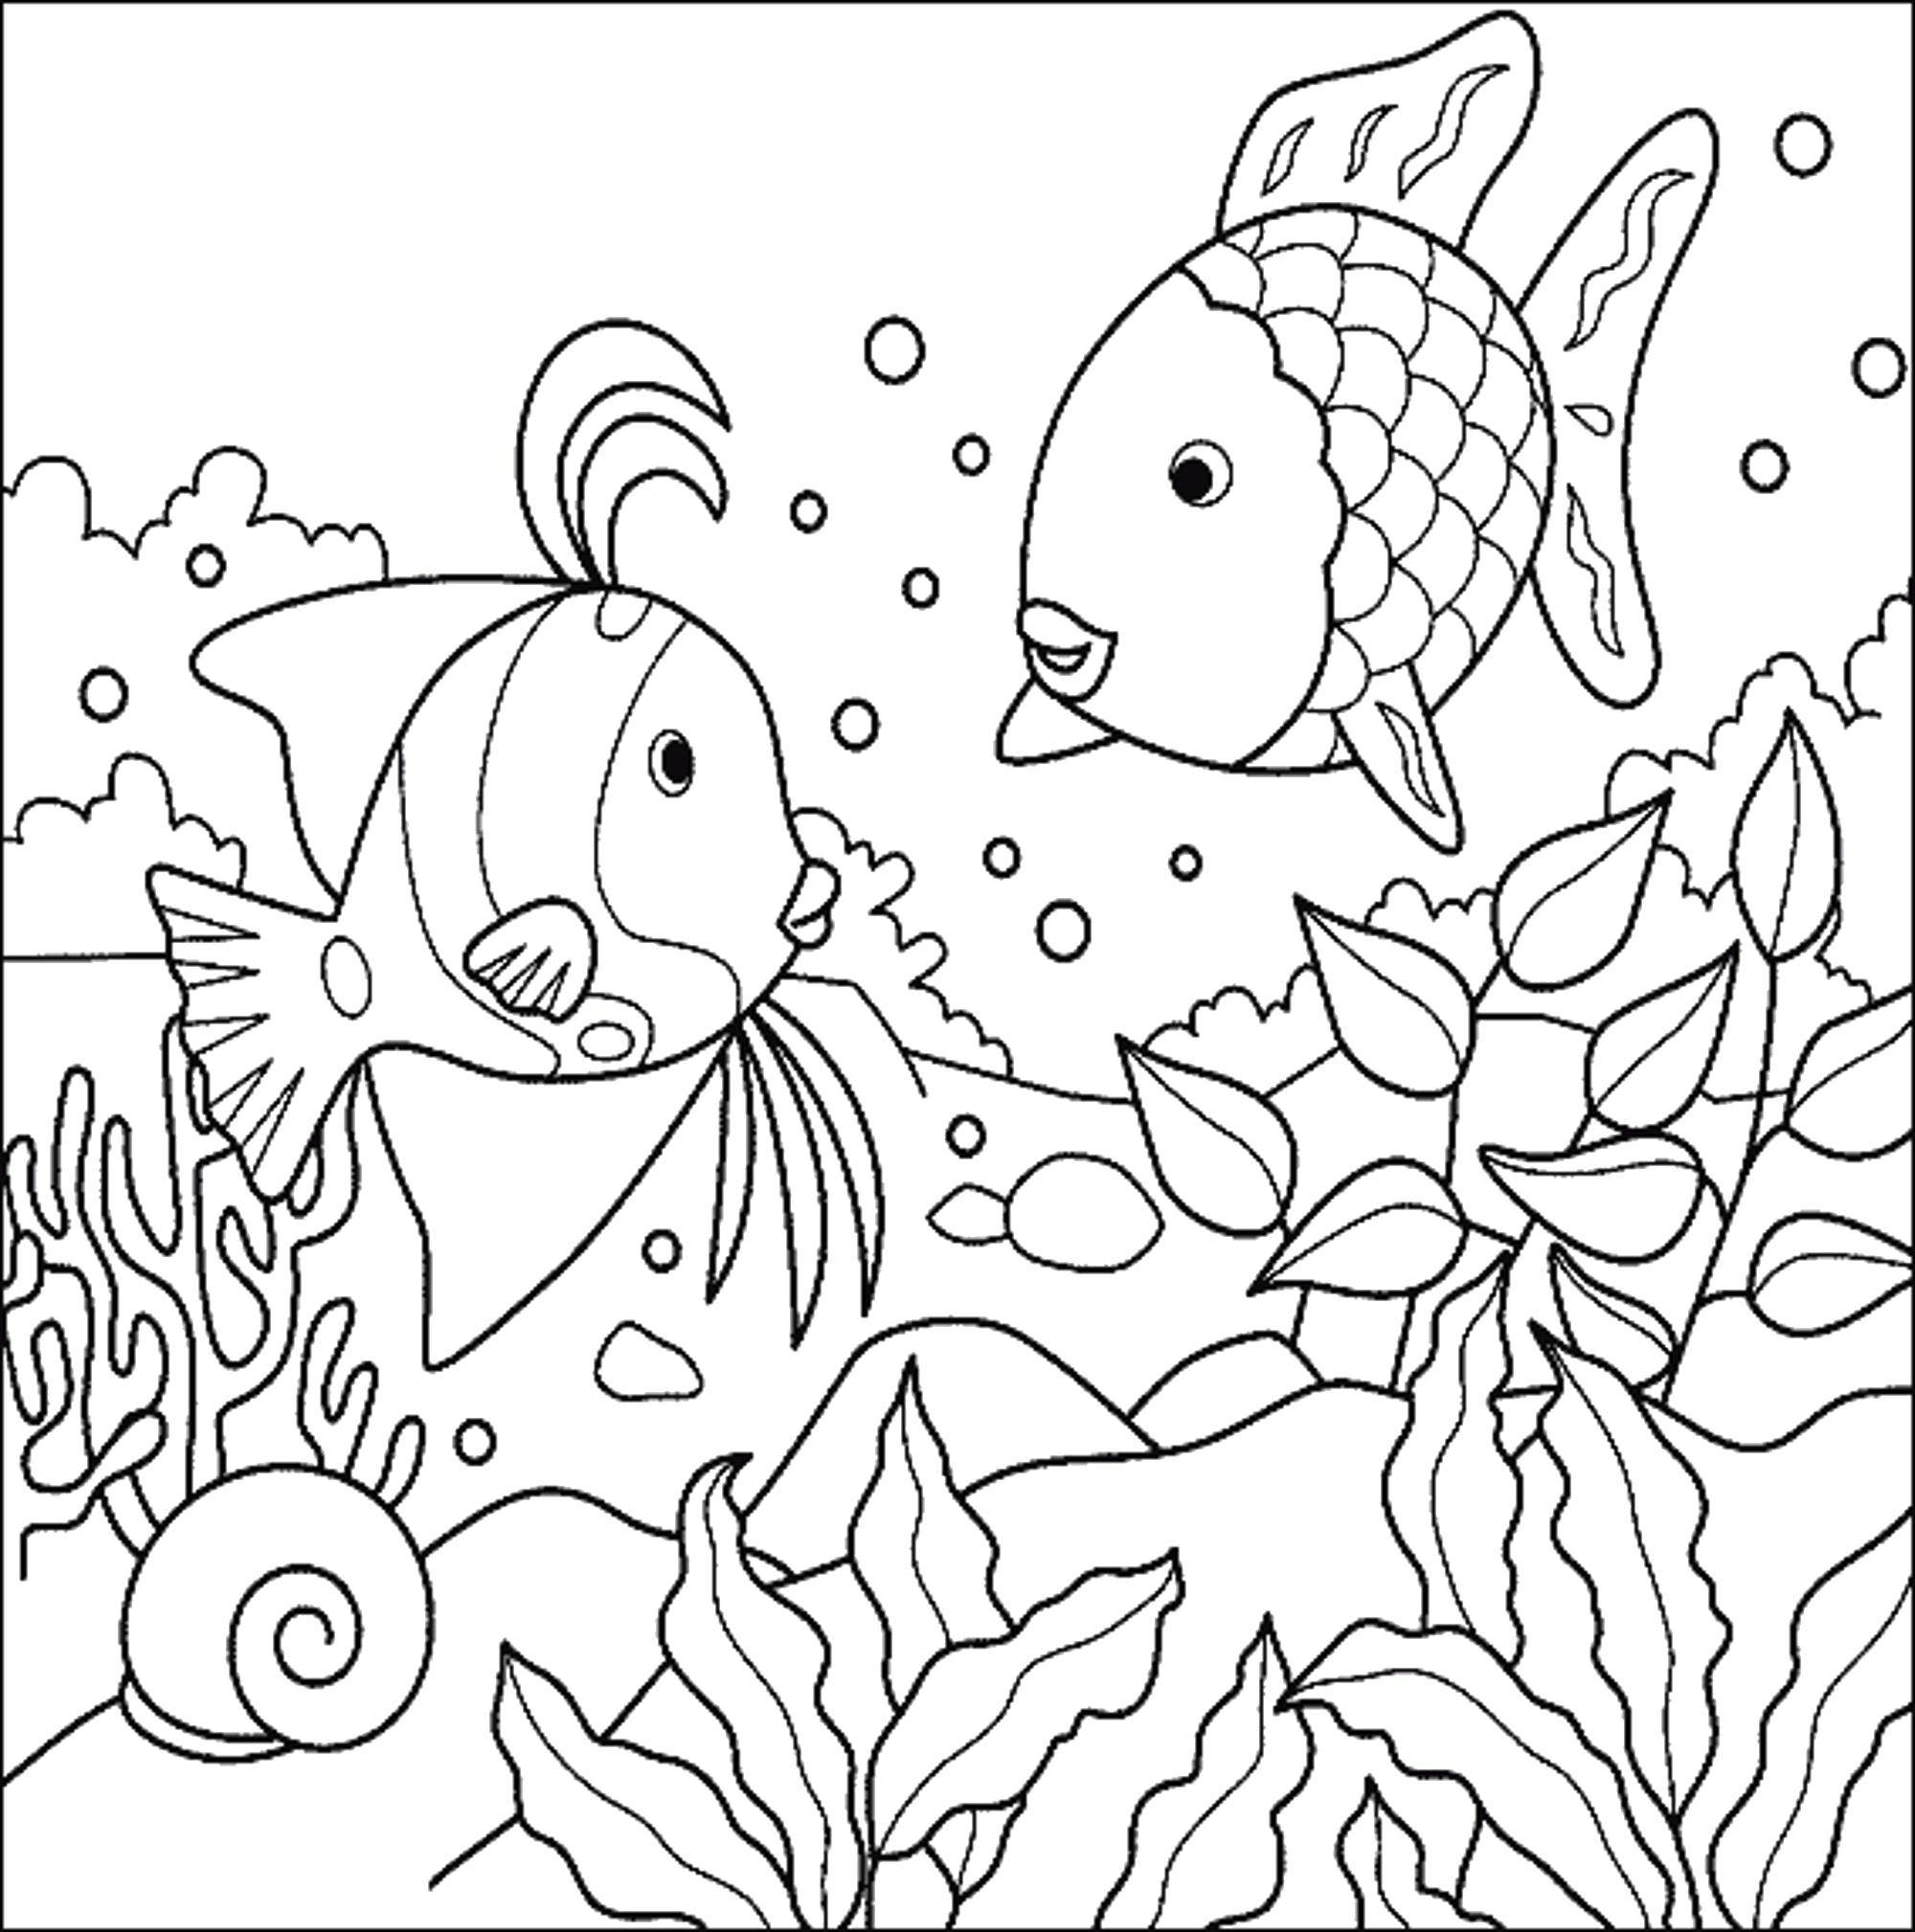 Coloring Fish - friends. Category fish. Tags:  Underwater world, fish.